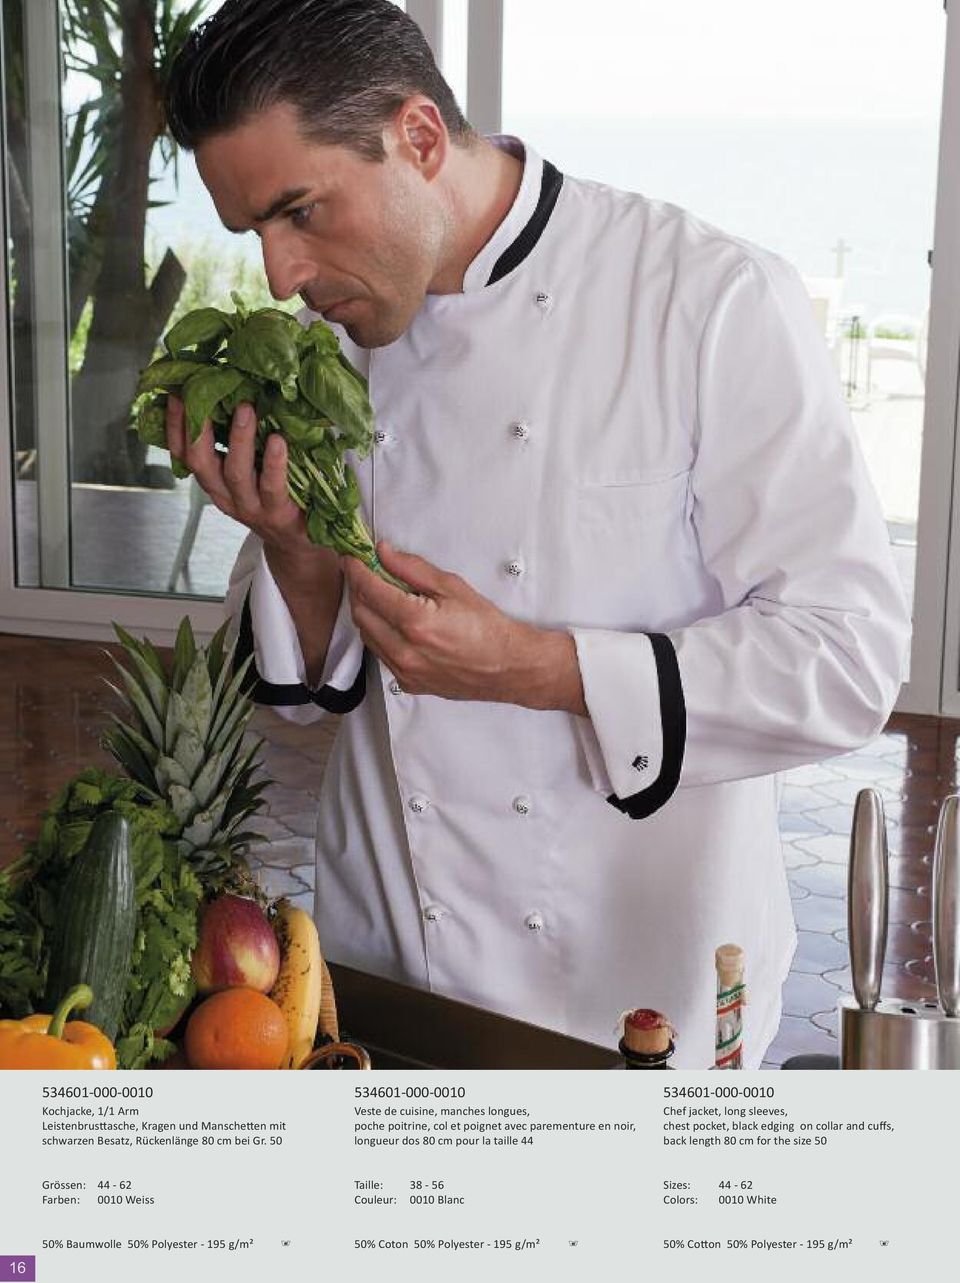 534601-000-0010 Chef jacket, long sleeves, chest pocket, black edging on collar and cuffs, back length 80 cm for the size 50 Grössen: 44-62 Farben: